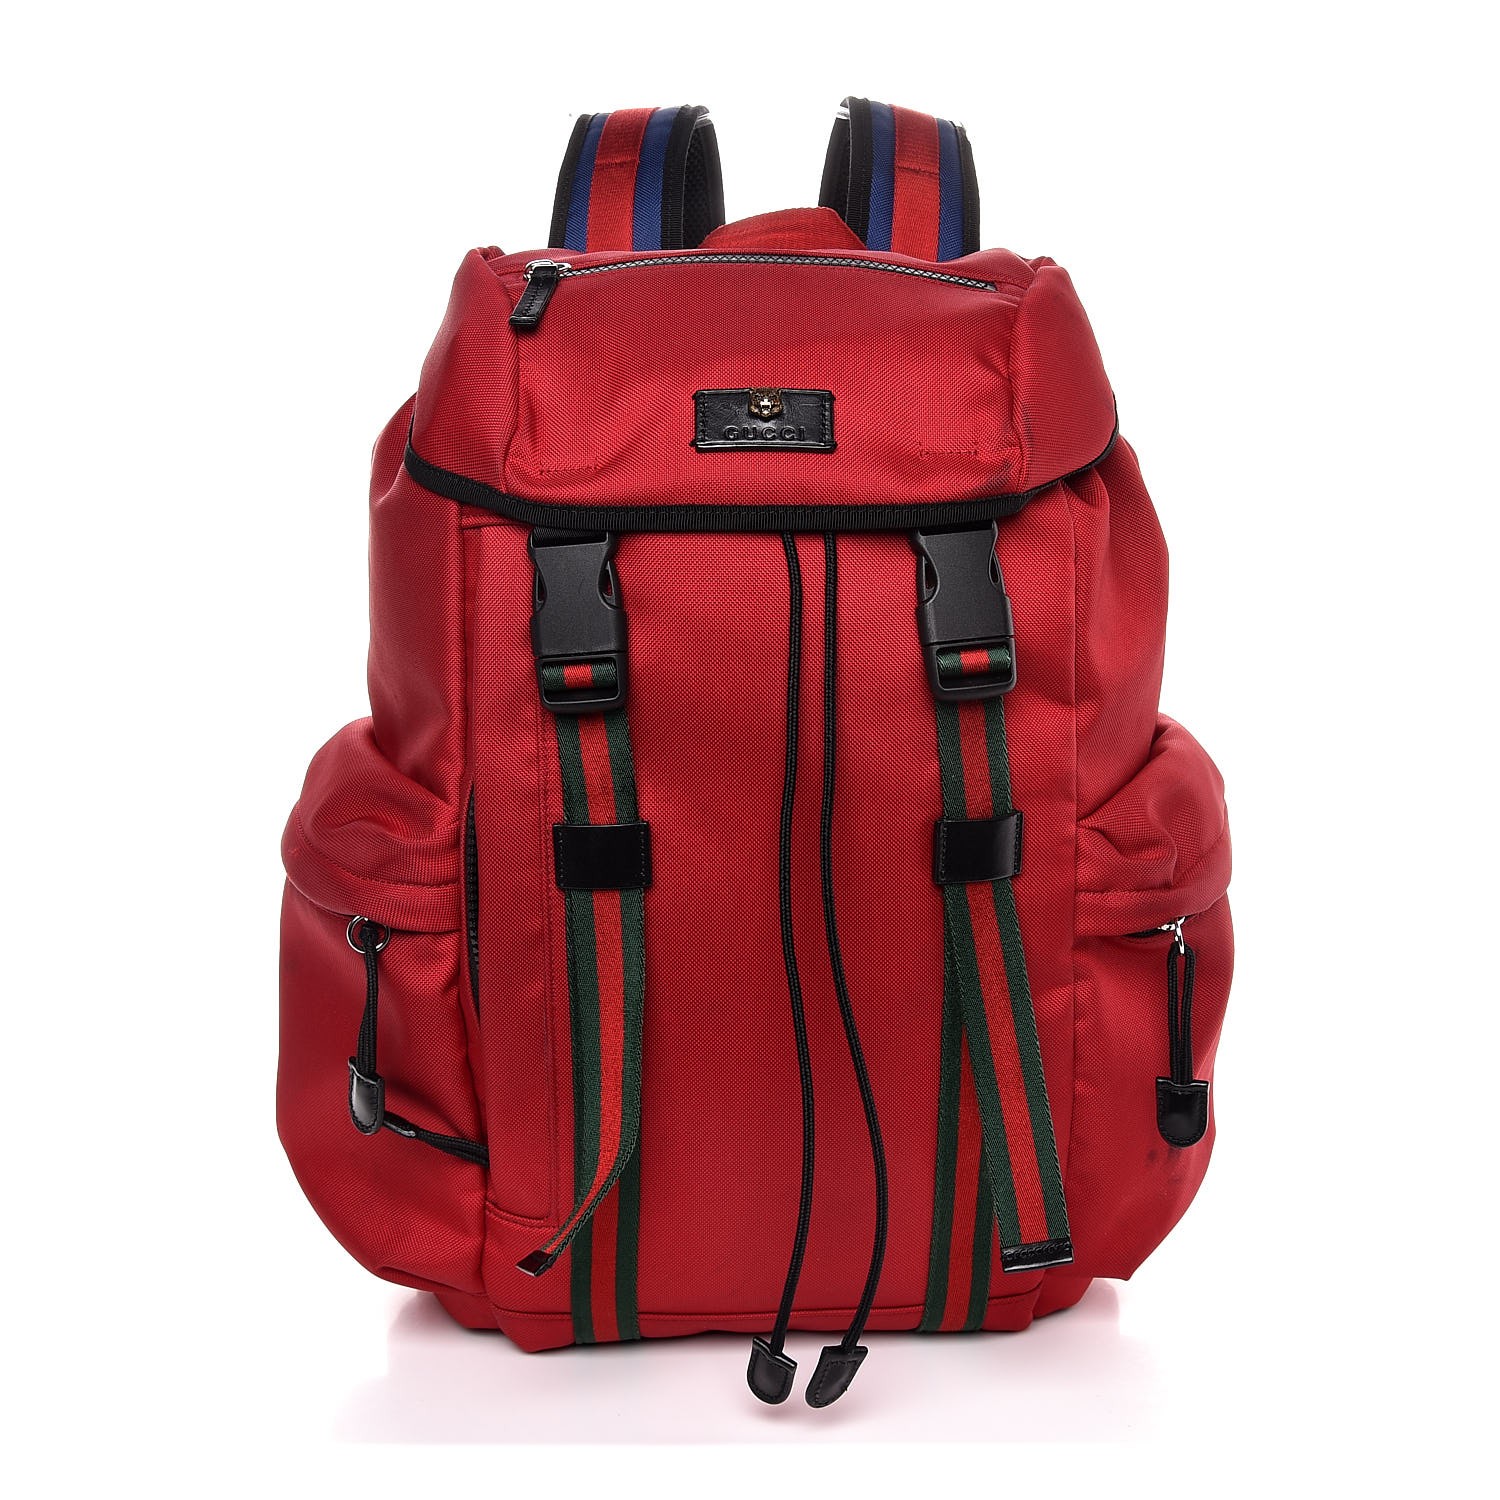 GUCCI Canvas Web Techno Backpack Red 298299